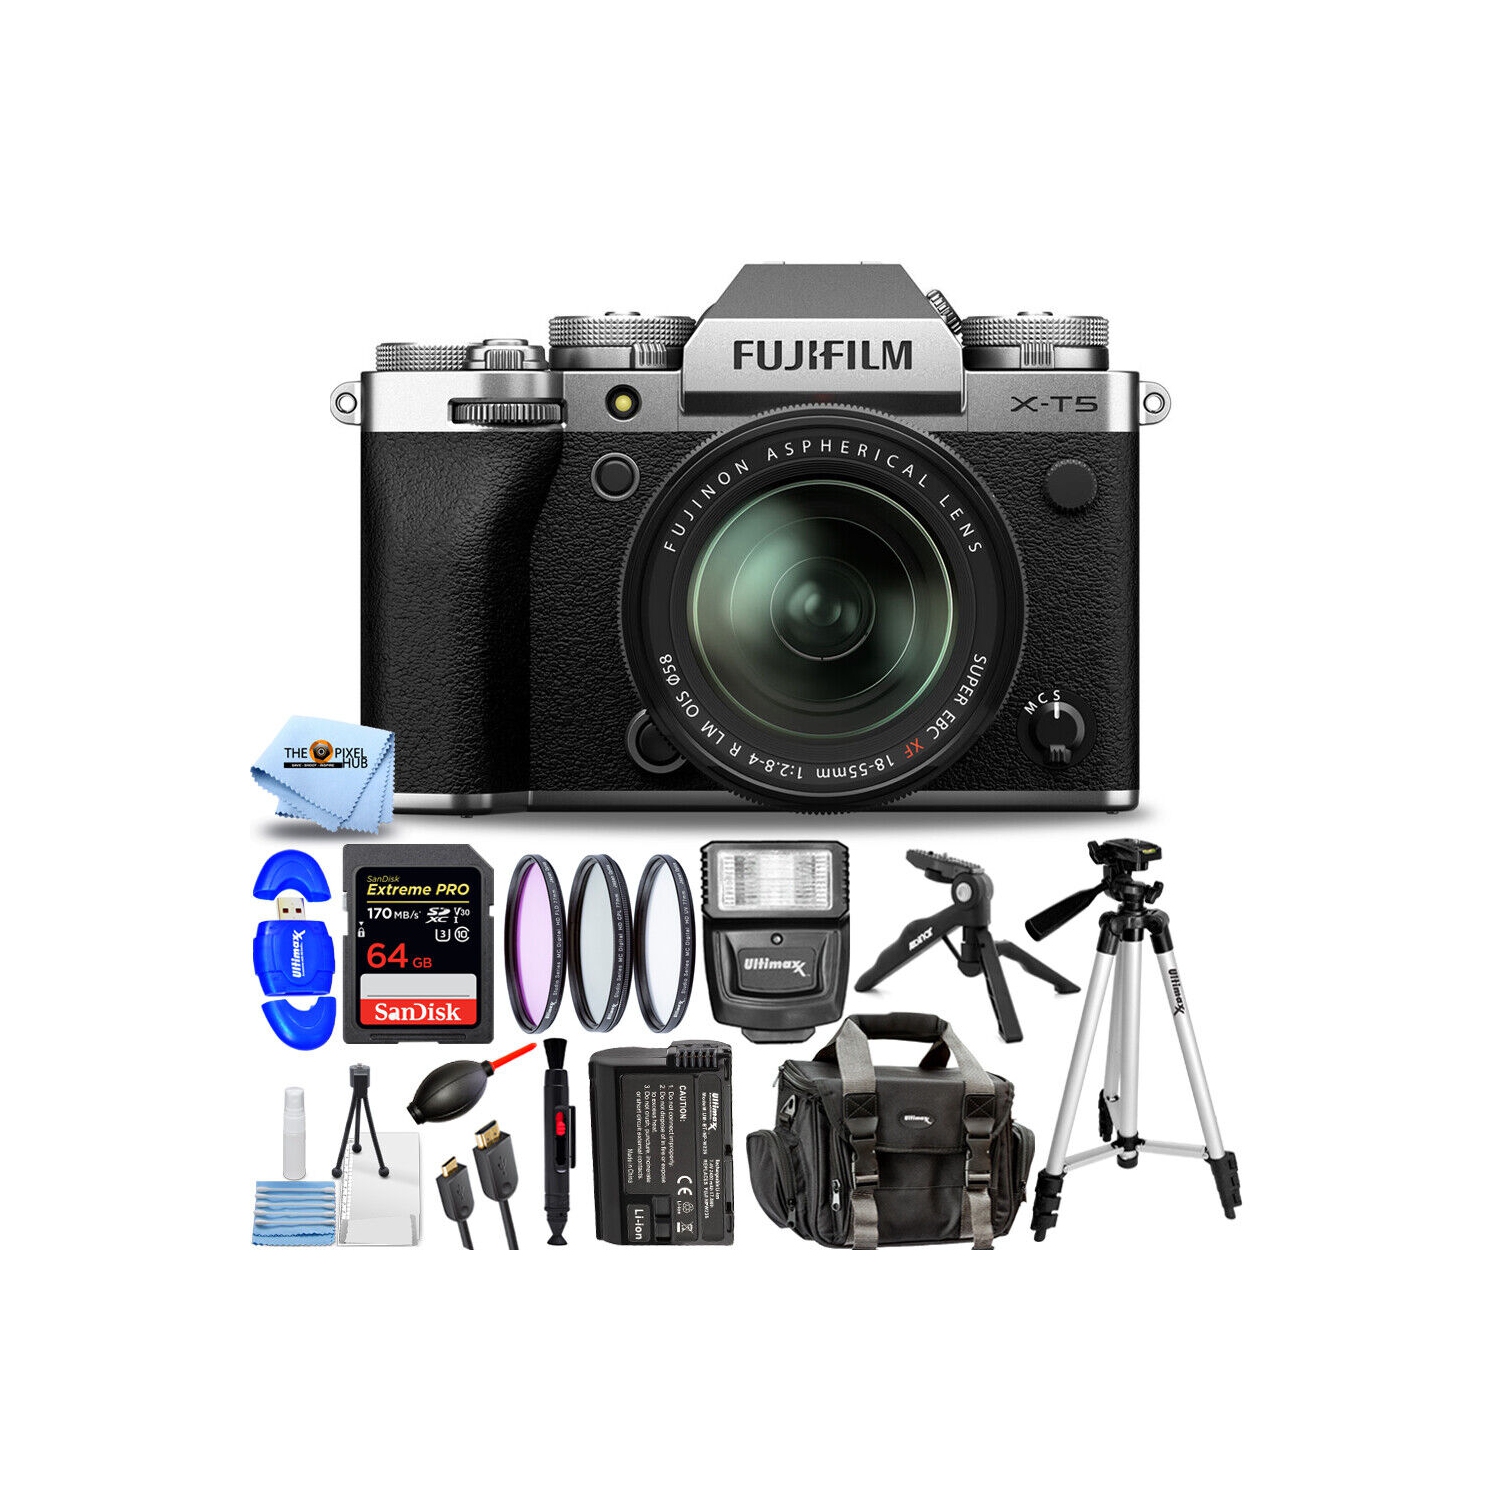 FUJIFILM X-T5 Mirrorless Camera with 18-55mm Lens Silver - 14PC Accessory Bundle